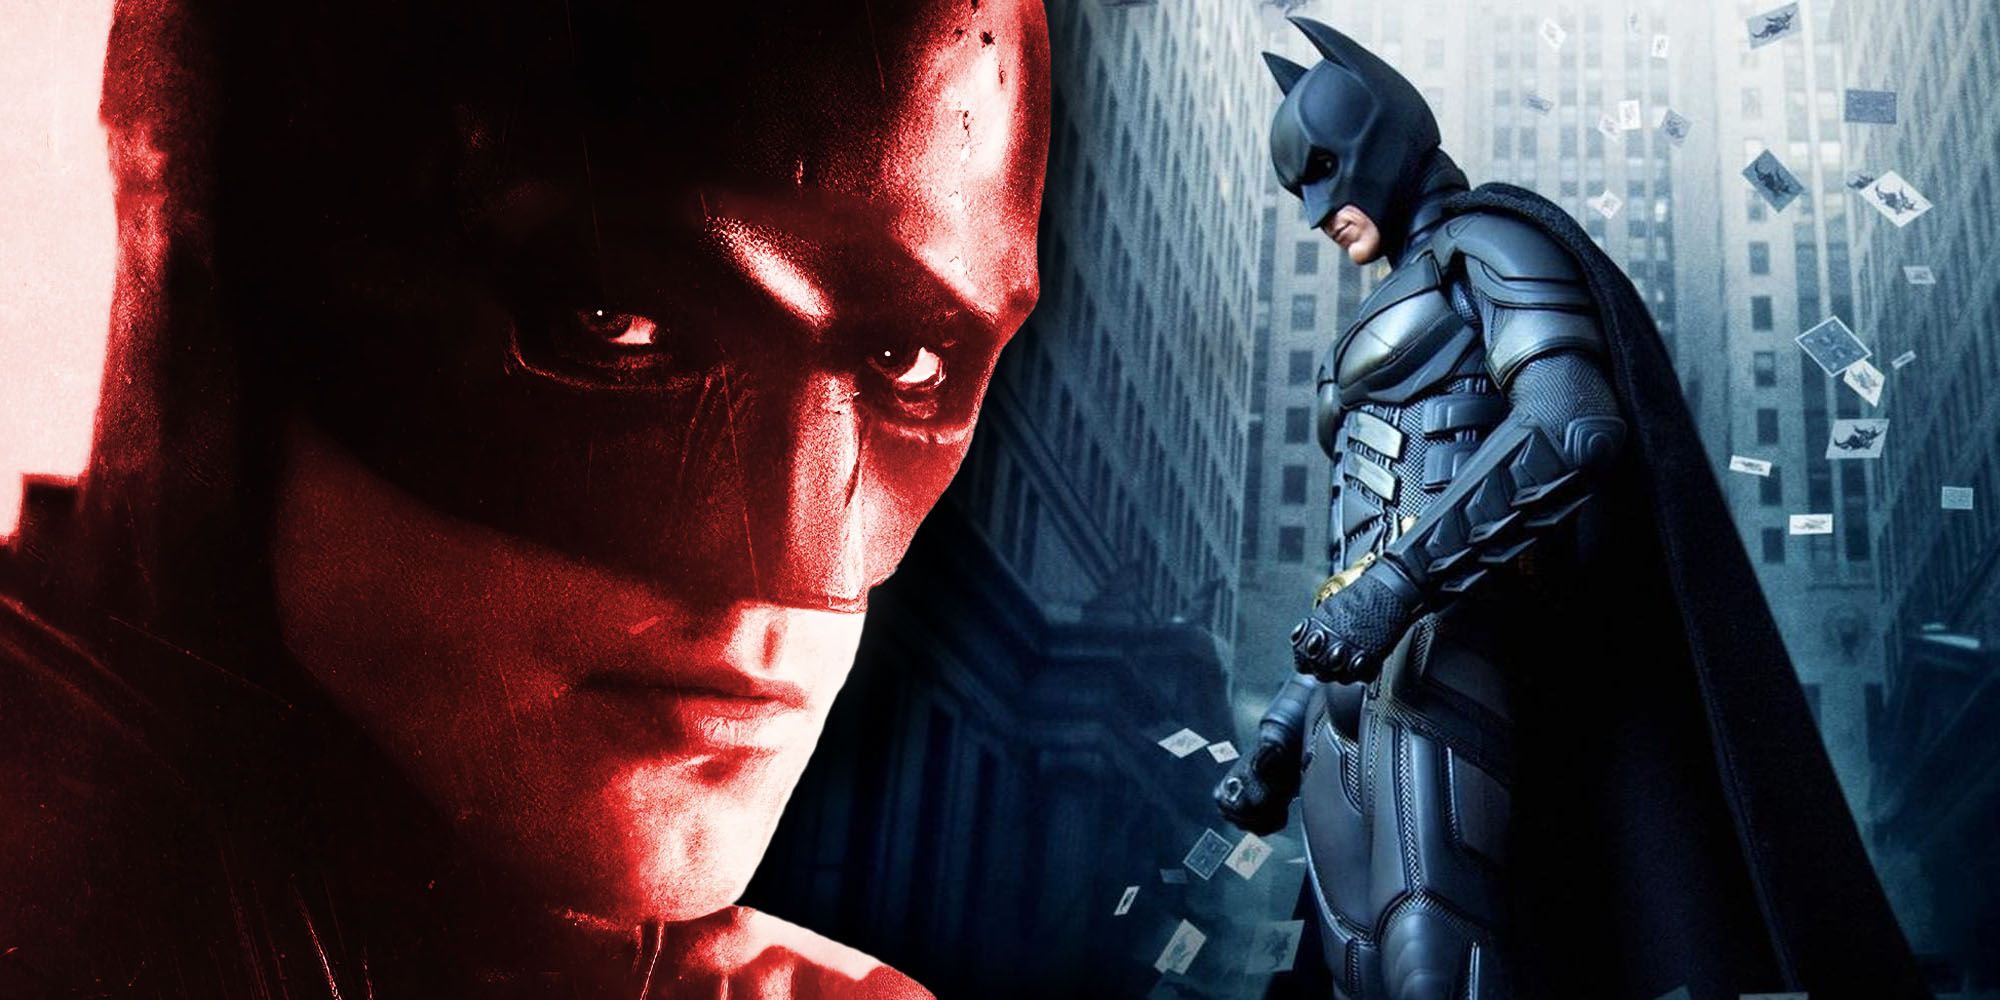 The Batman’s $772.2m Box Office Success Sets It Up To Beat The Dark Knight Trilogy’s Legacy